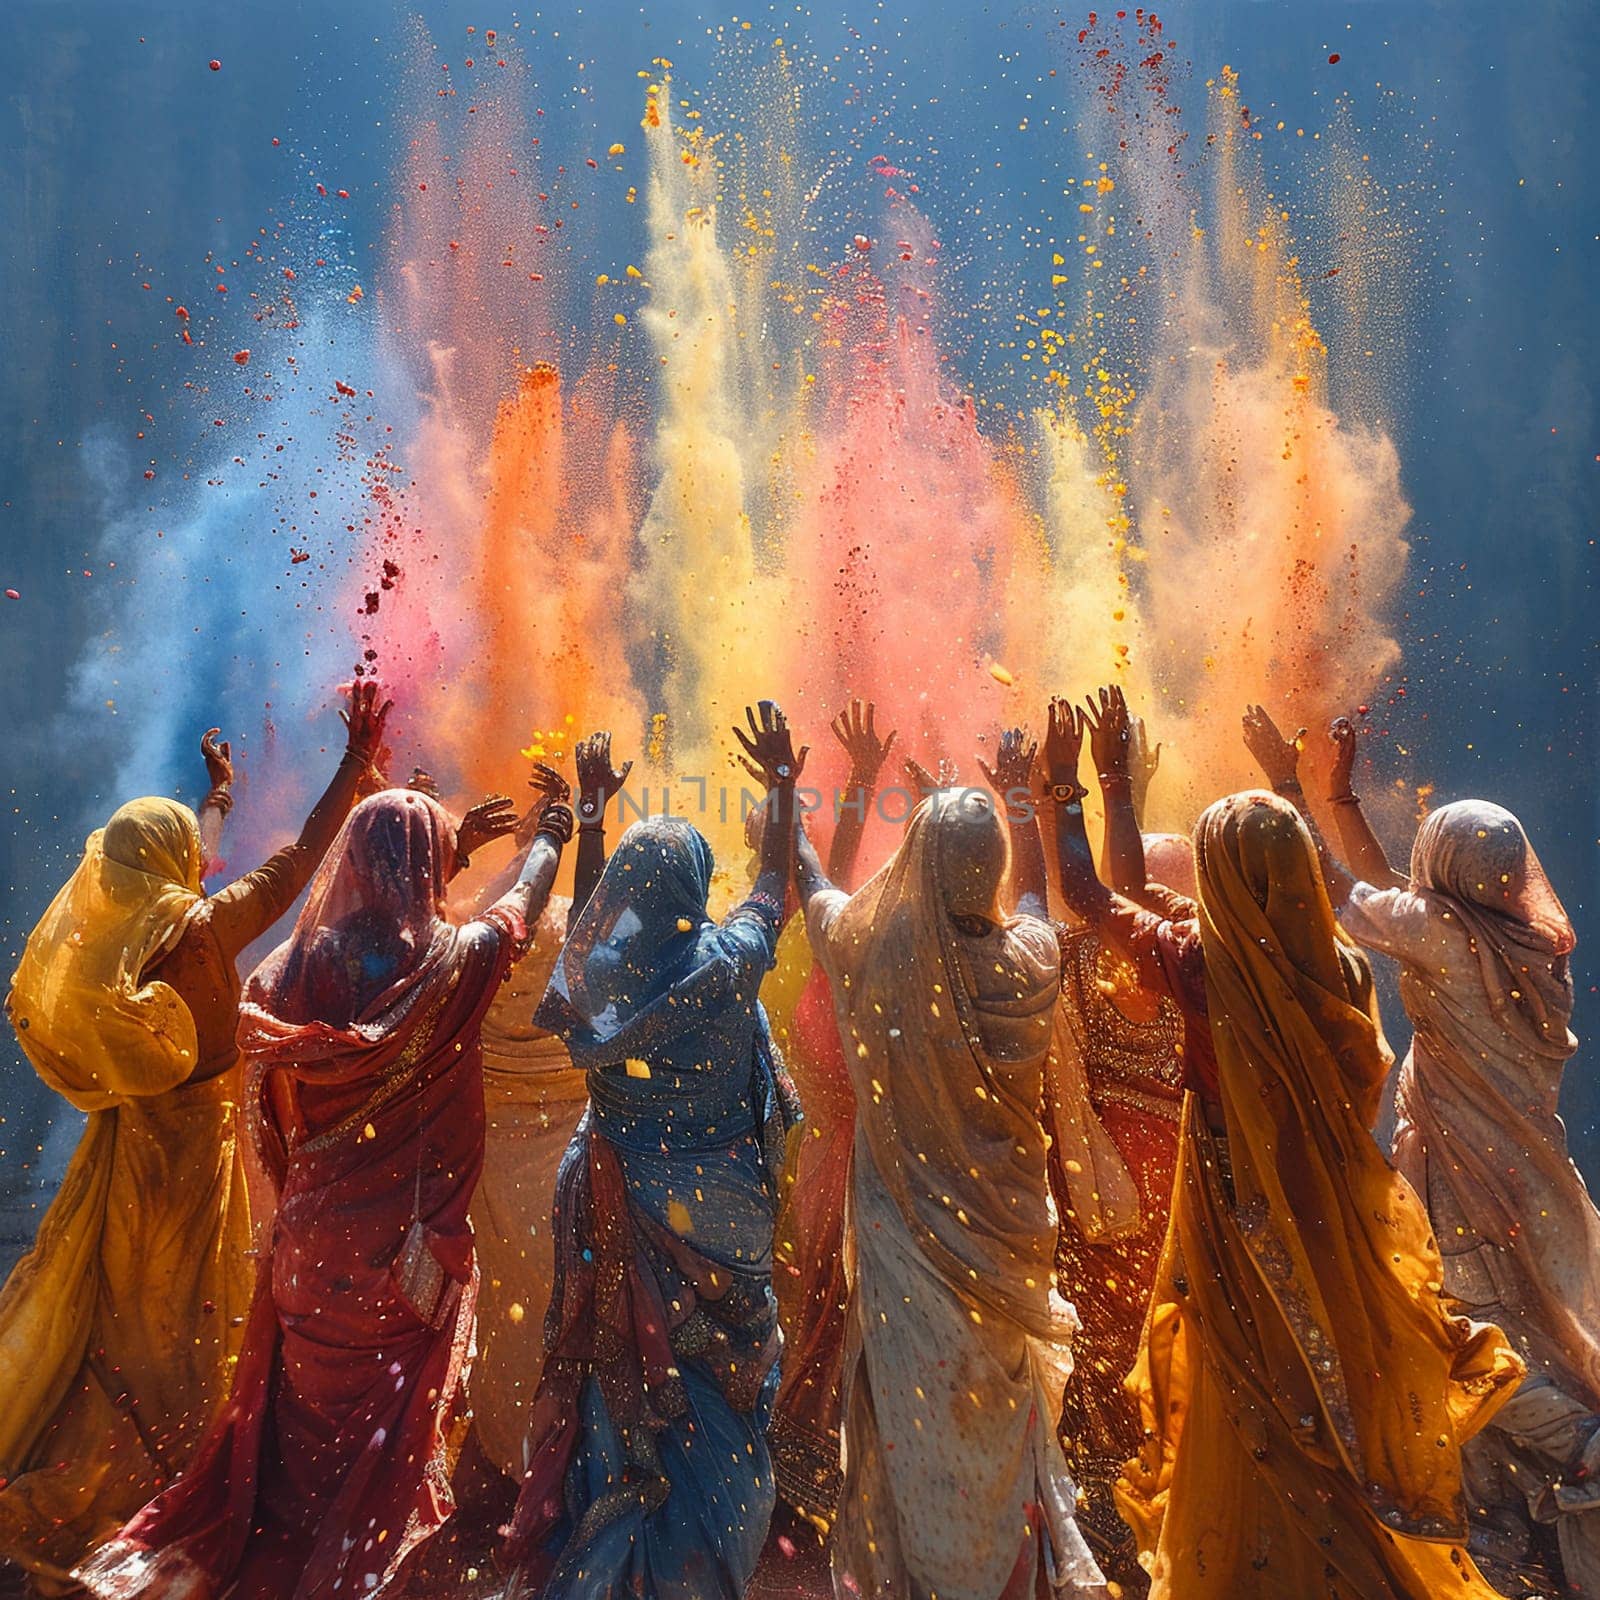 Surreal depiction of people in diverse traditional costumes, joyously throwing colored powder for Holi.